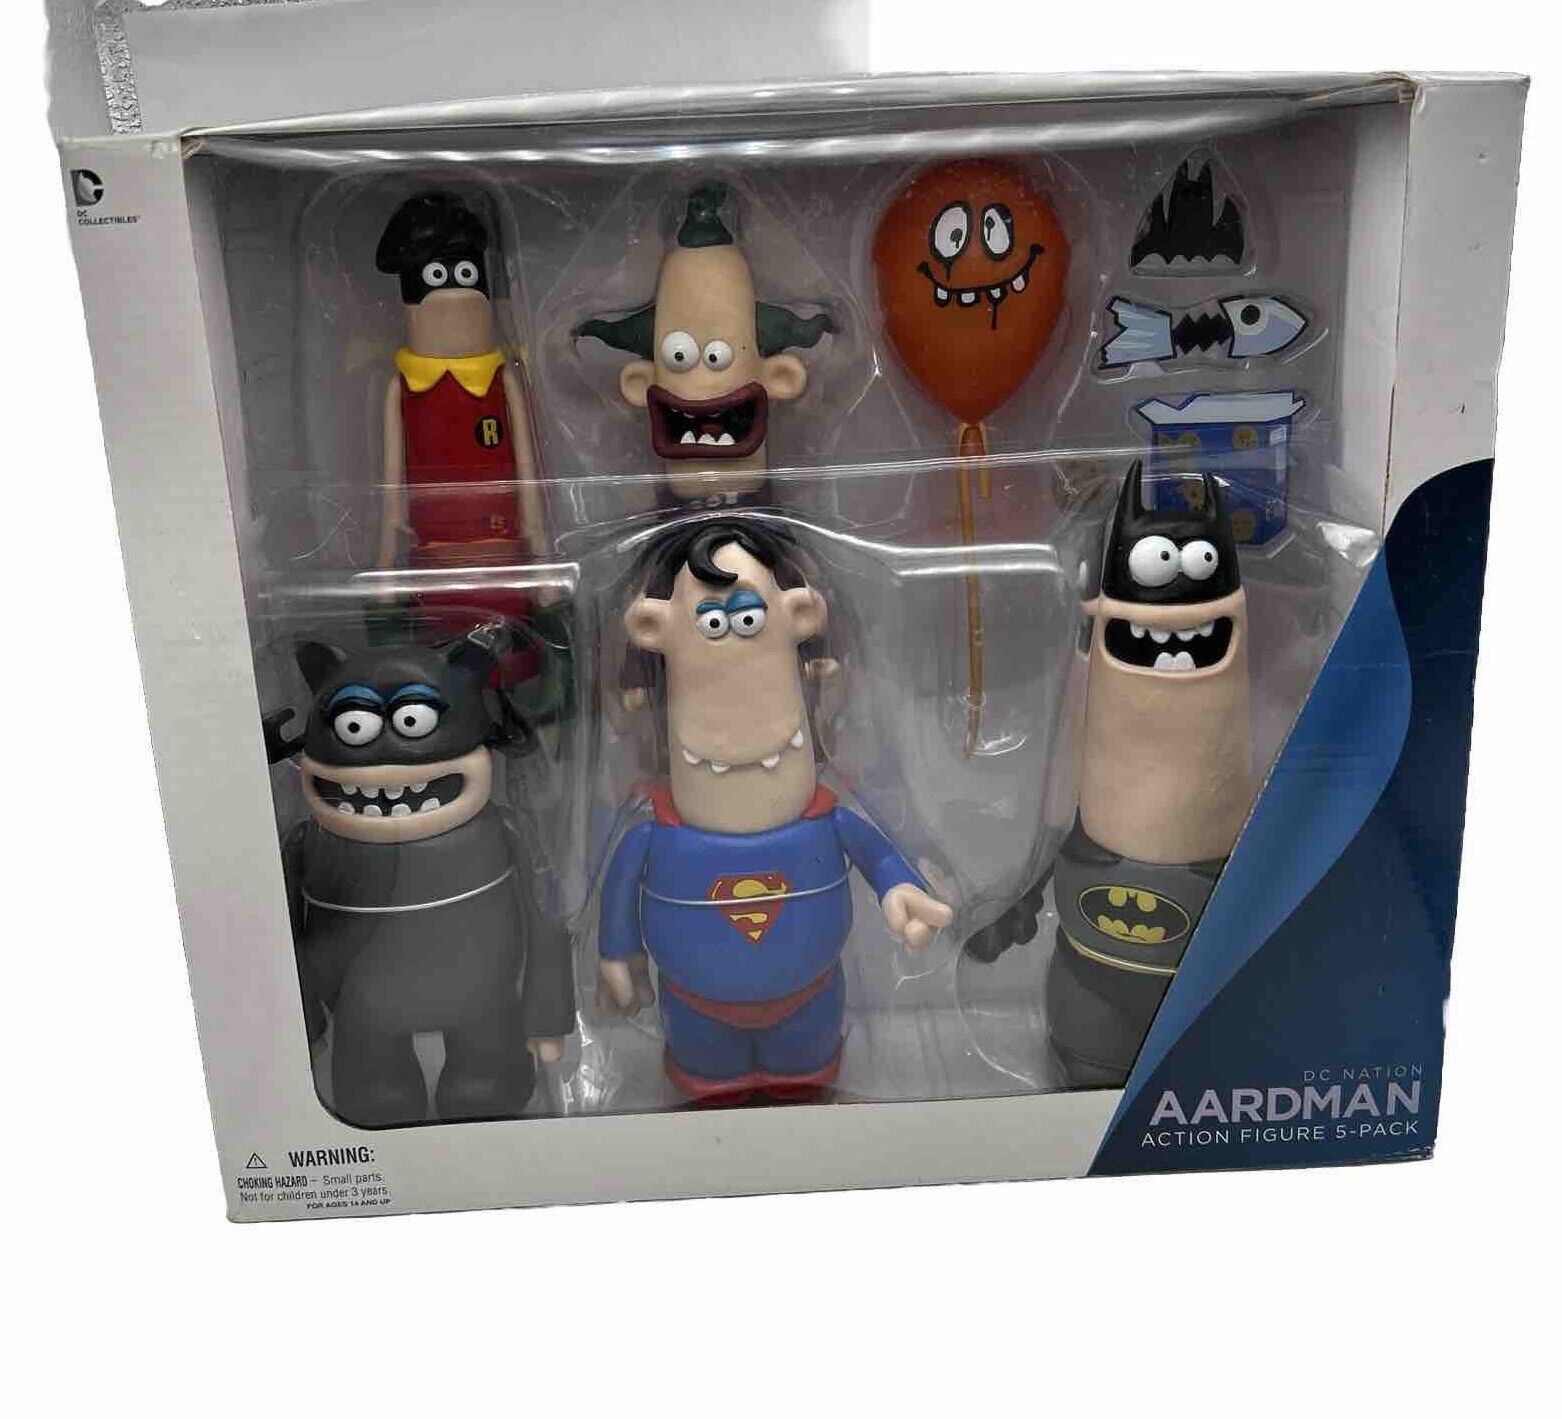 DC Nation Aardman Action Figure 5-Pack DC Collectibles Claymation - NEW SEALED